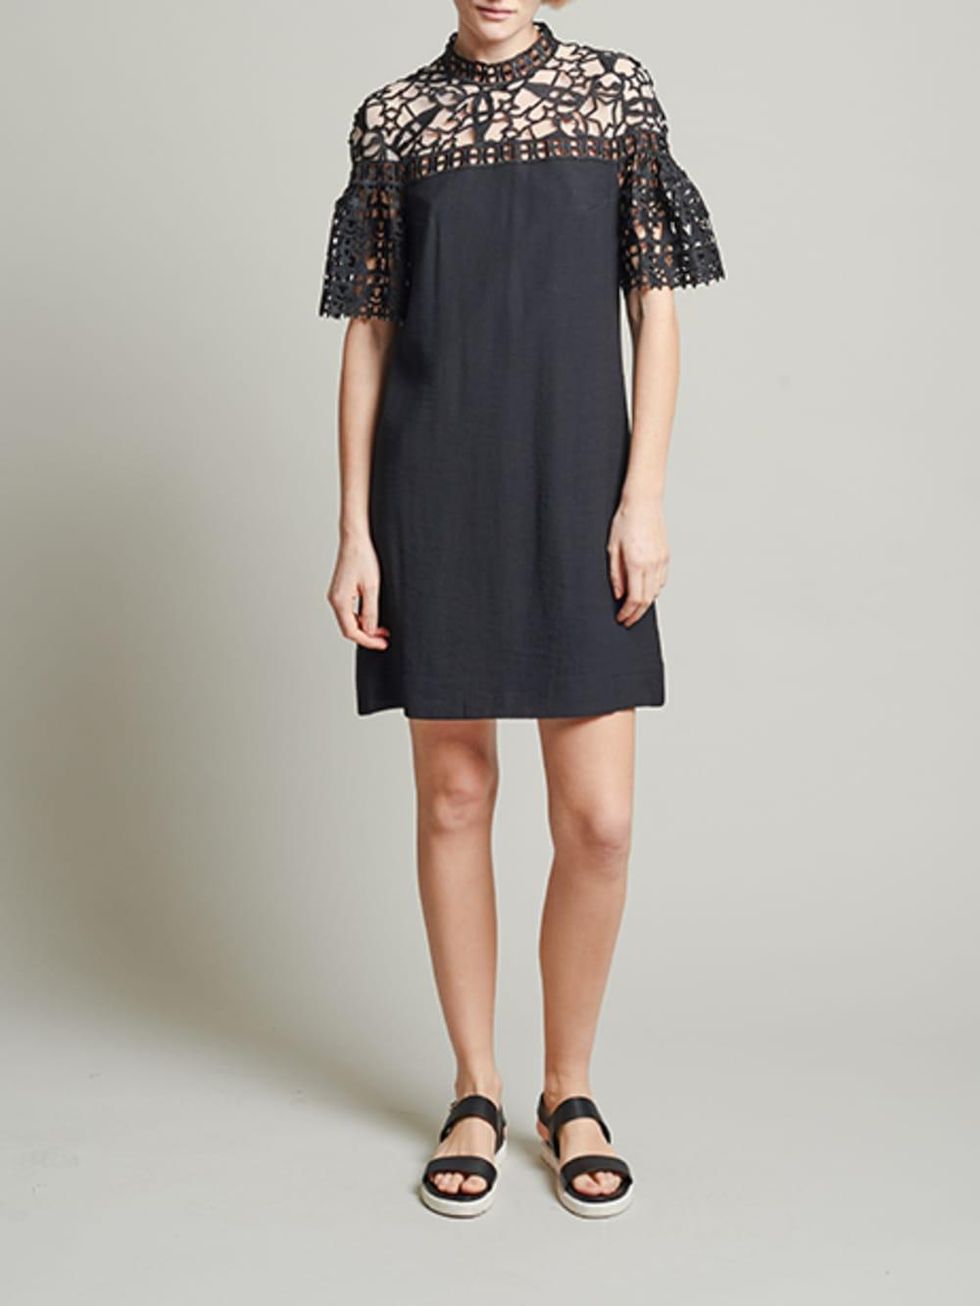 Vivienne Tam Rodeo and panda lace dress